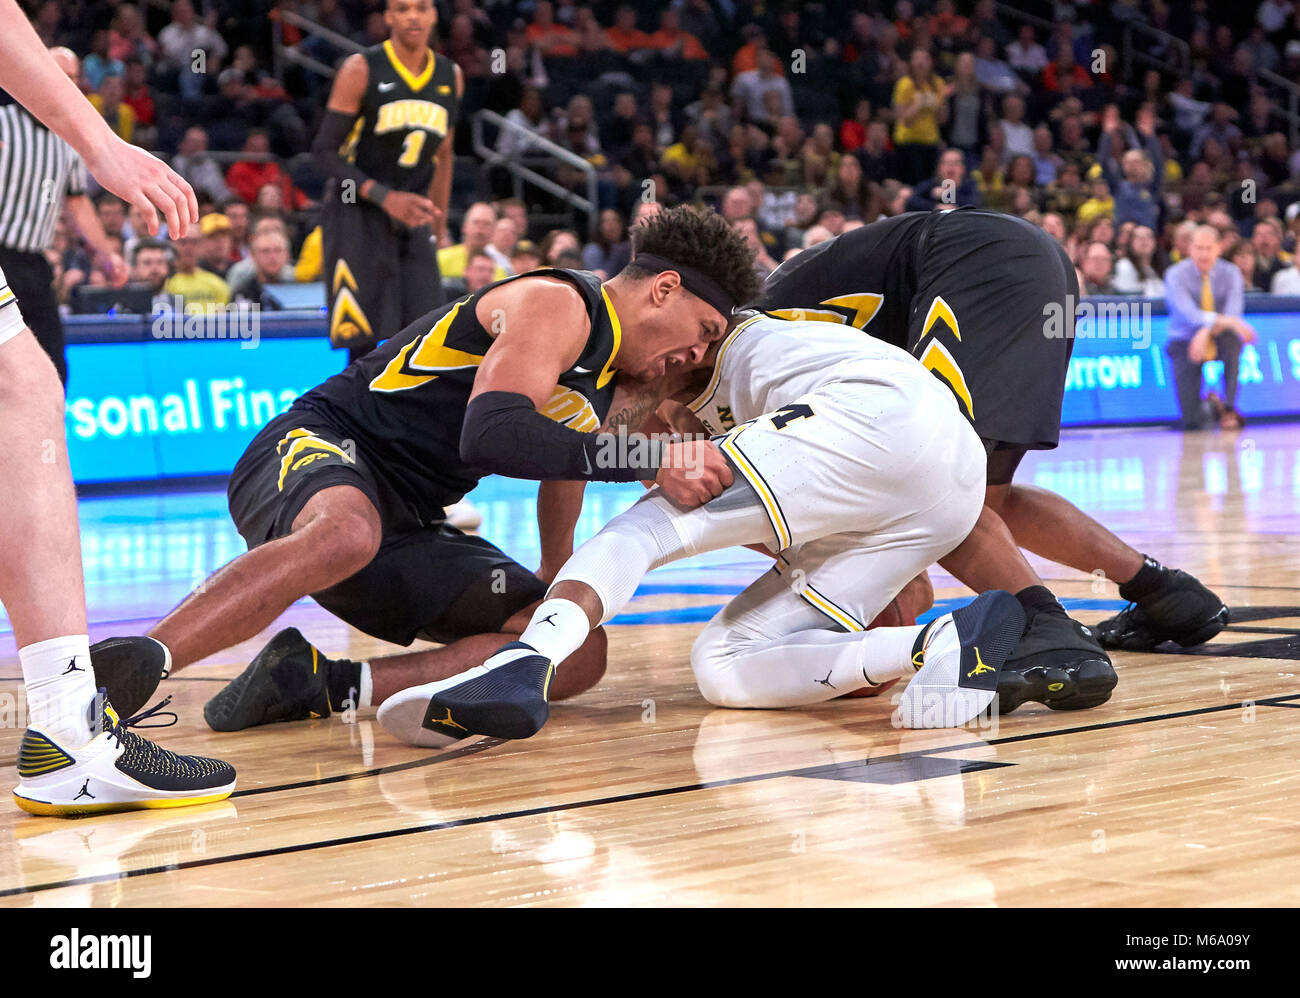 New York, New York, USA. 1st Mar, 2018. Iowa Hawkeyes forward Ahmad Wagner (0) and Michigan Wolverines guard Charles Matthews (1) battle for a loose ball during the second round of Big Ten Conference Tournament play at Madison Square Garden in New York City. Michigan defeats Iowa in over time 77-71. Duncan Williams/CSM/Alamy Live News Stock Photo